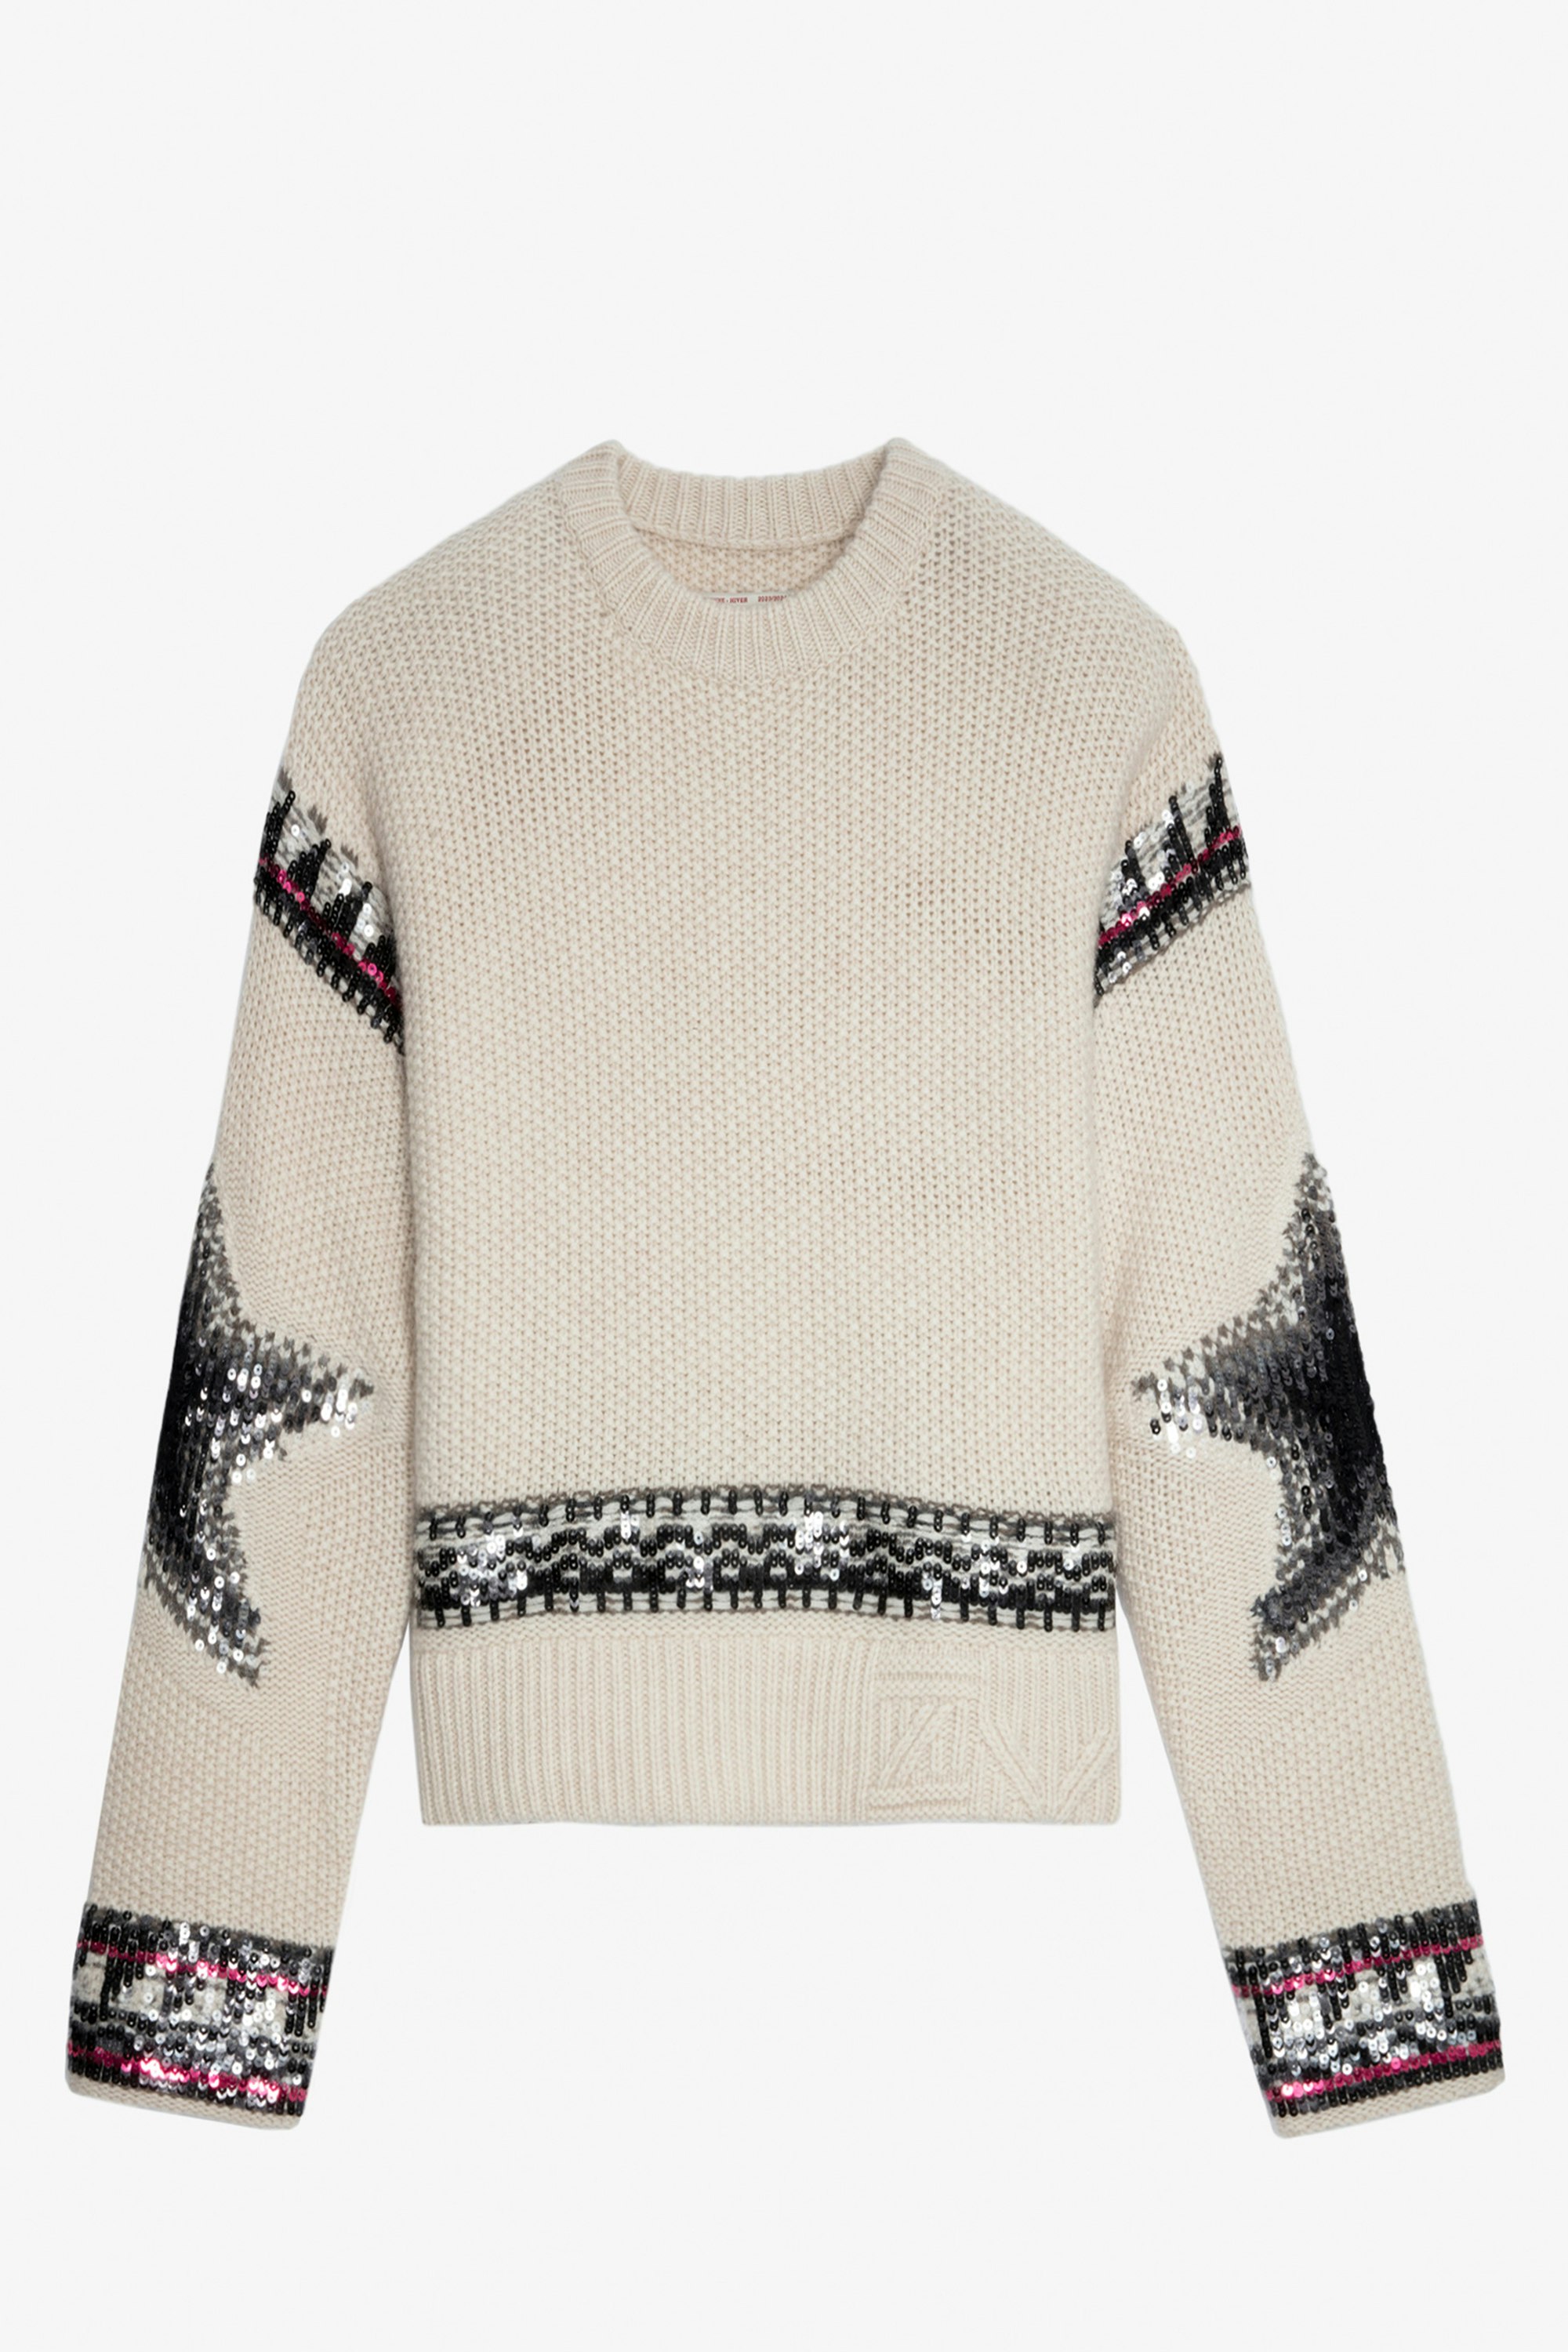 Kanson Sequins Cashmere Sweater - Women’s off-white cashmere sweater with star motifs and sequin bands positioned by hand for a unique look.